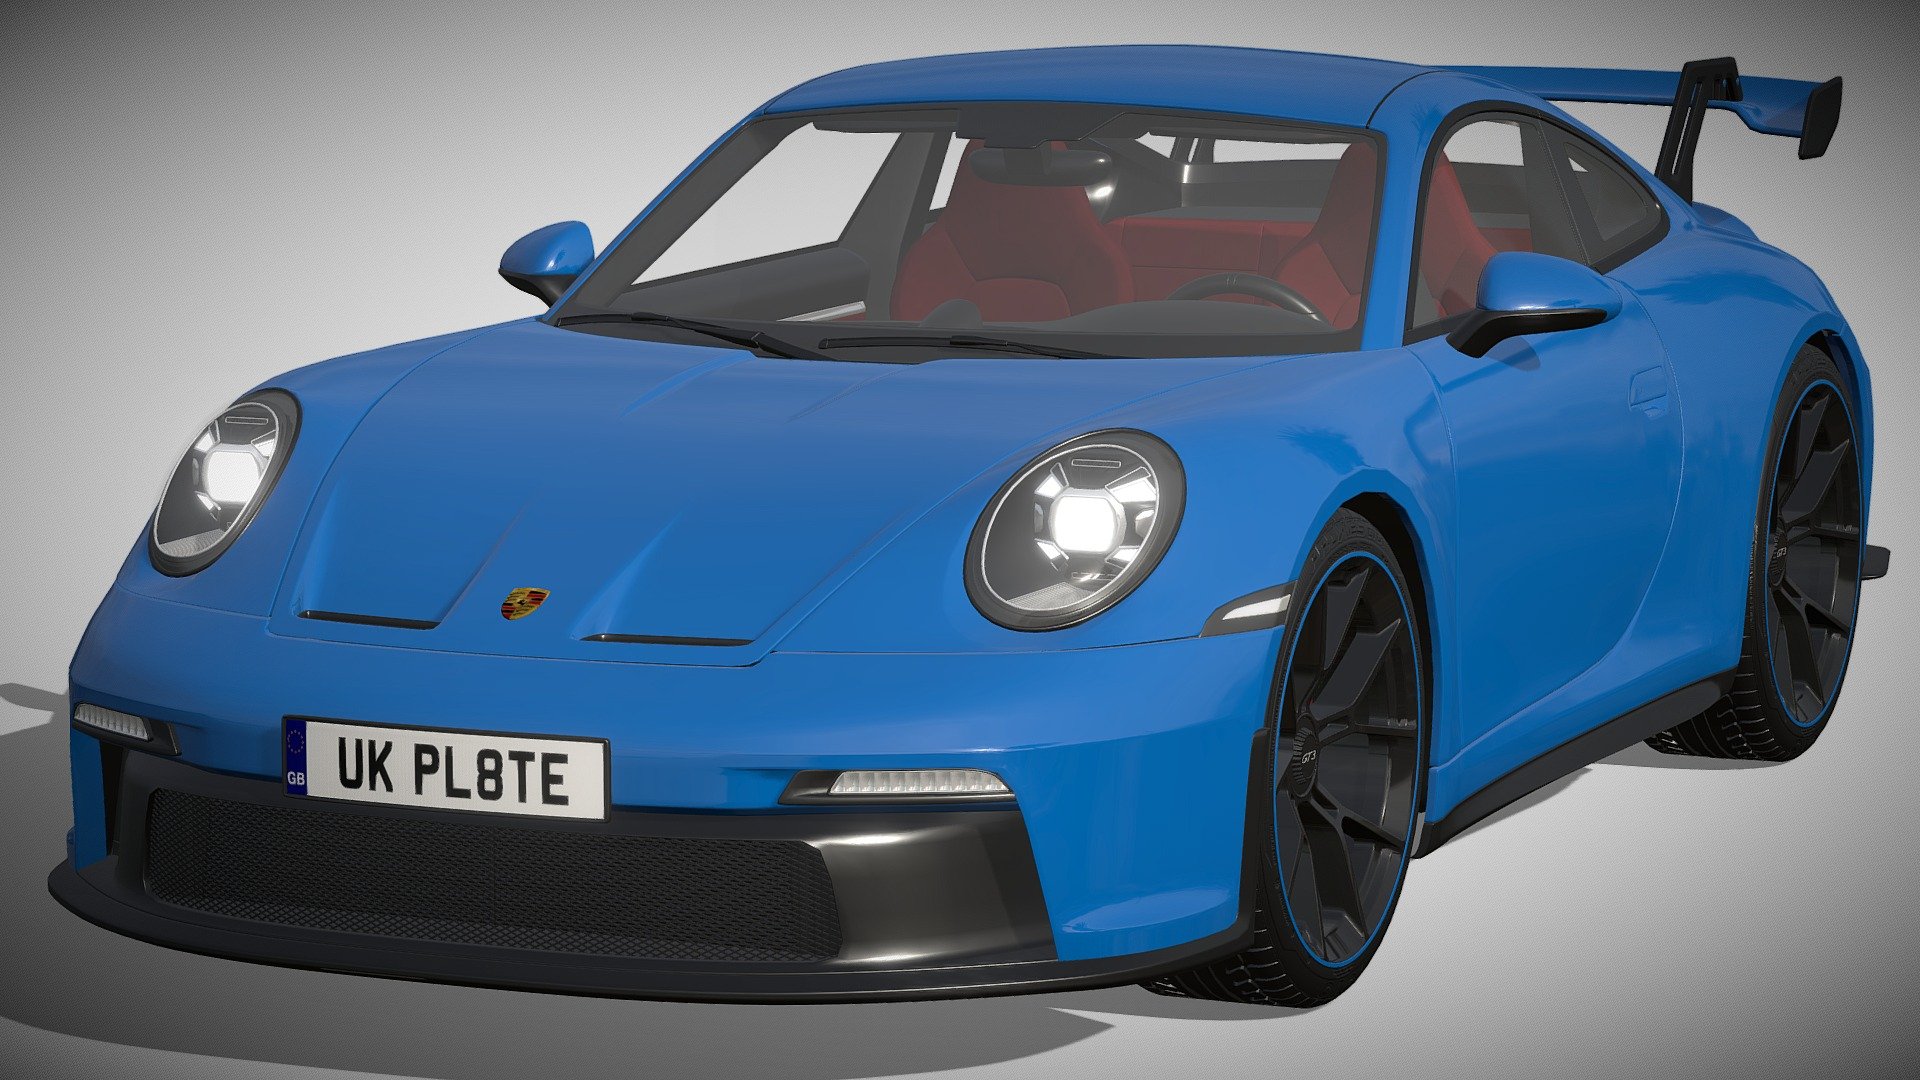 Porsche 911 GT3 2021

https://www.porsche.com/usa/models/911/911-gt3-models/

Clean geometry Light weight model, yet completely detailed for HI-Res renders. Use for movies, Advertisements or games

Corona render and materials

All textures include in *.rar files

Lighting setup is not included in the file! - Porsche 911 GT3 2021 - Buy Royalty Free 3D model by zifir3d 3d model